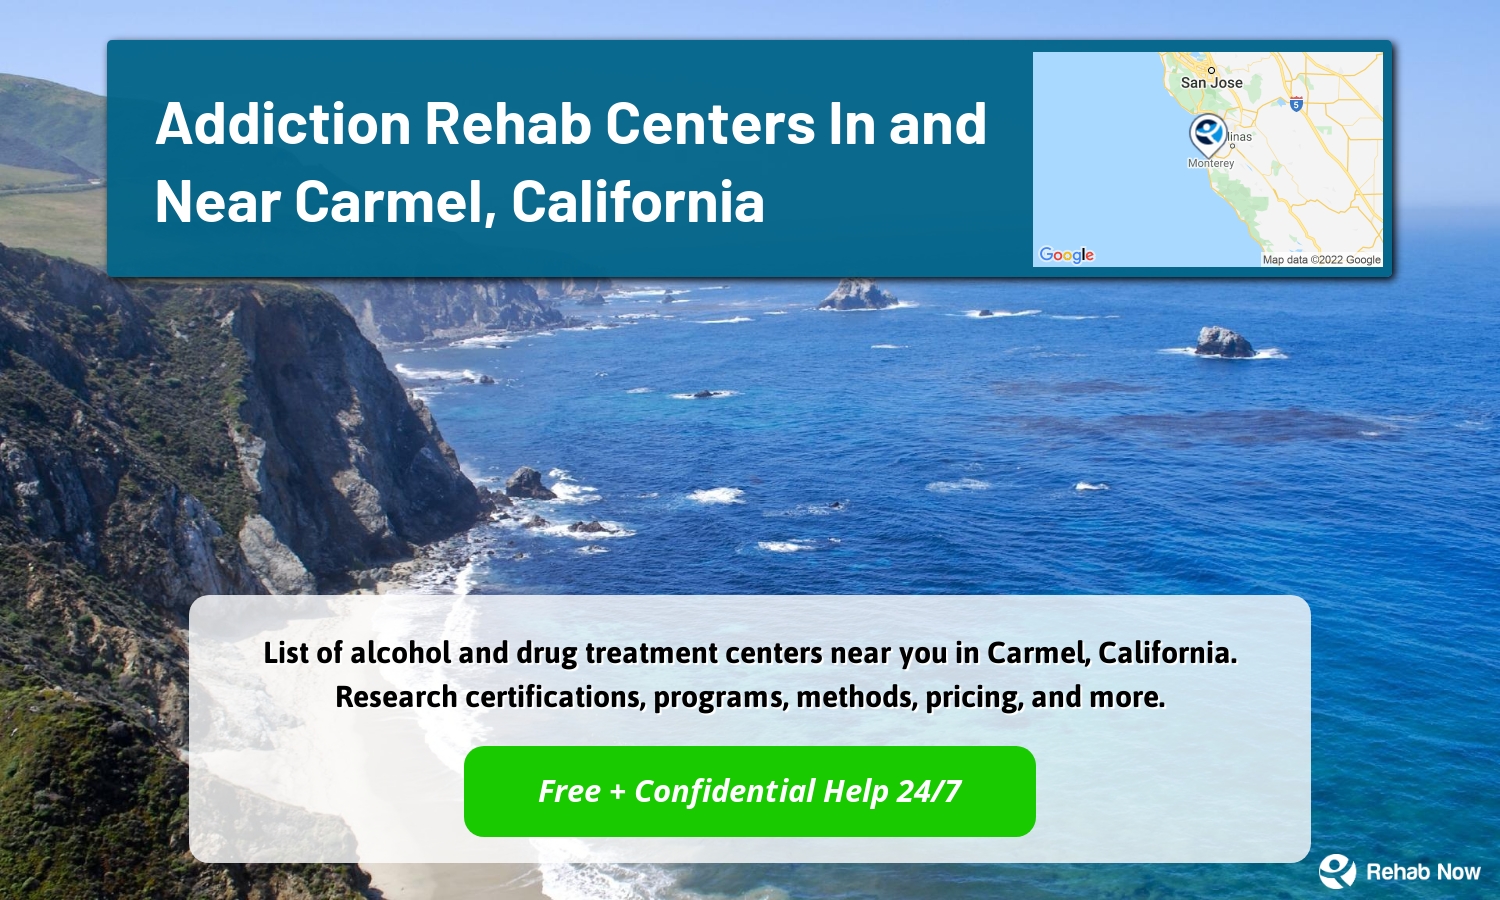 List of alcohol and drug treatment centers near you in Carmel, California. Research certifications, programs, methods, pricing, and more.